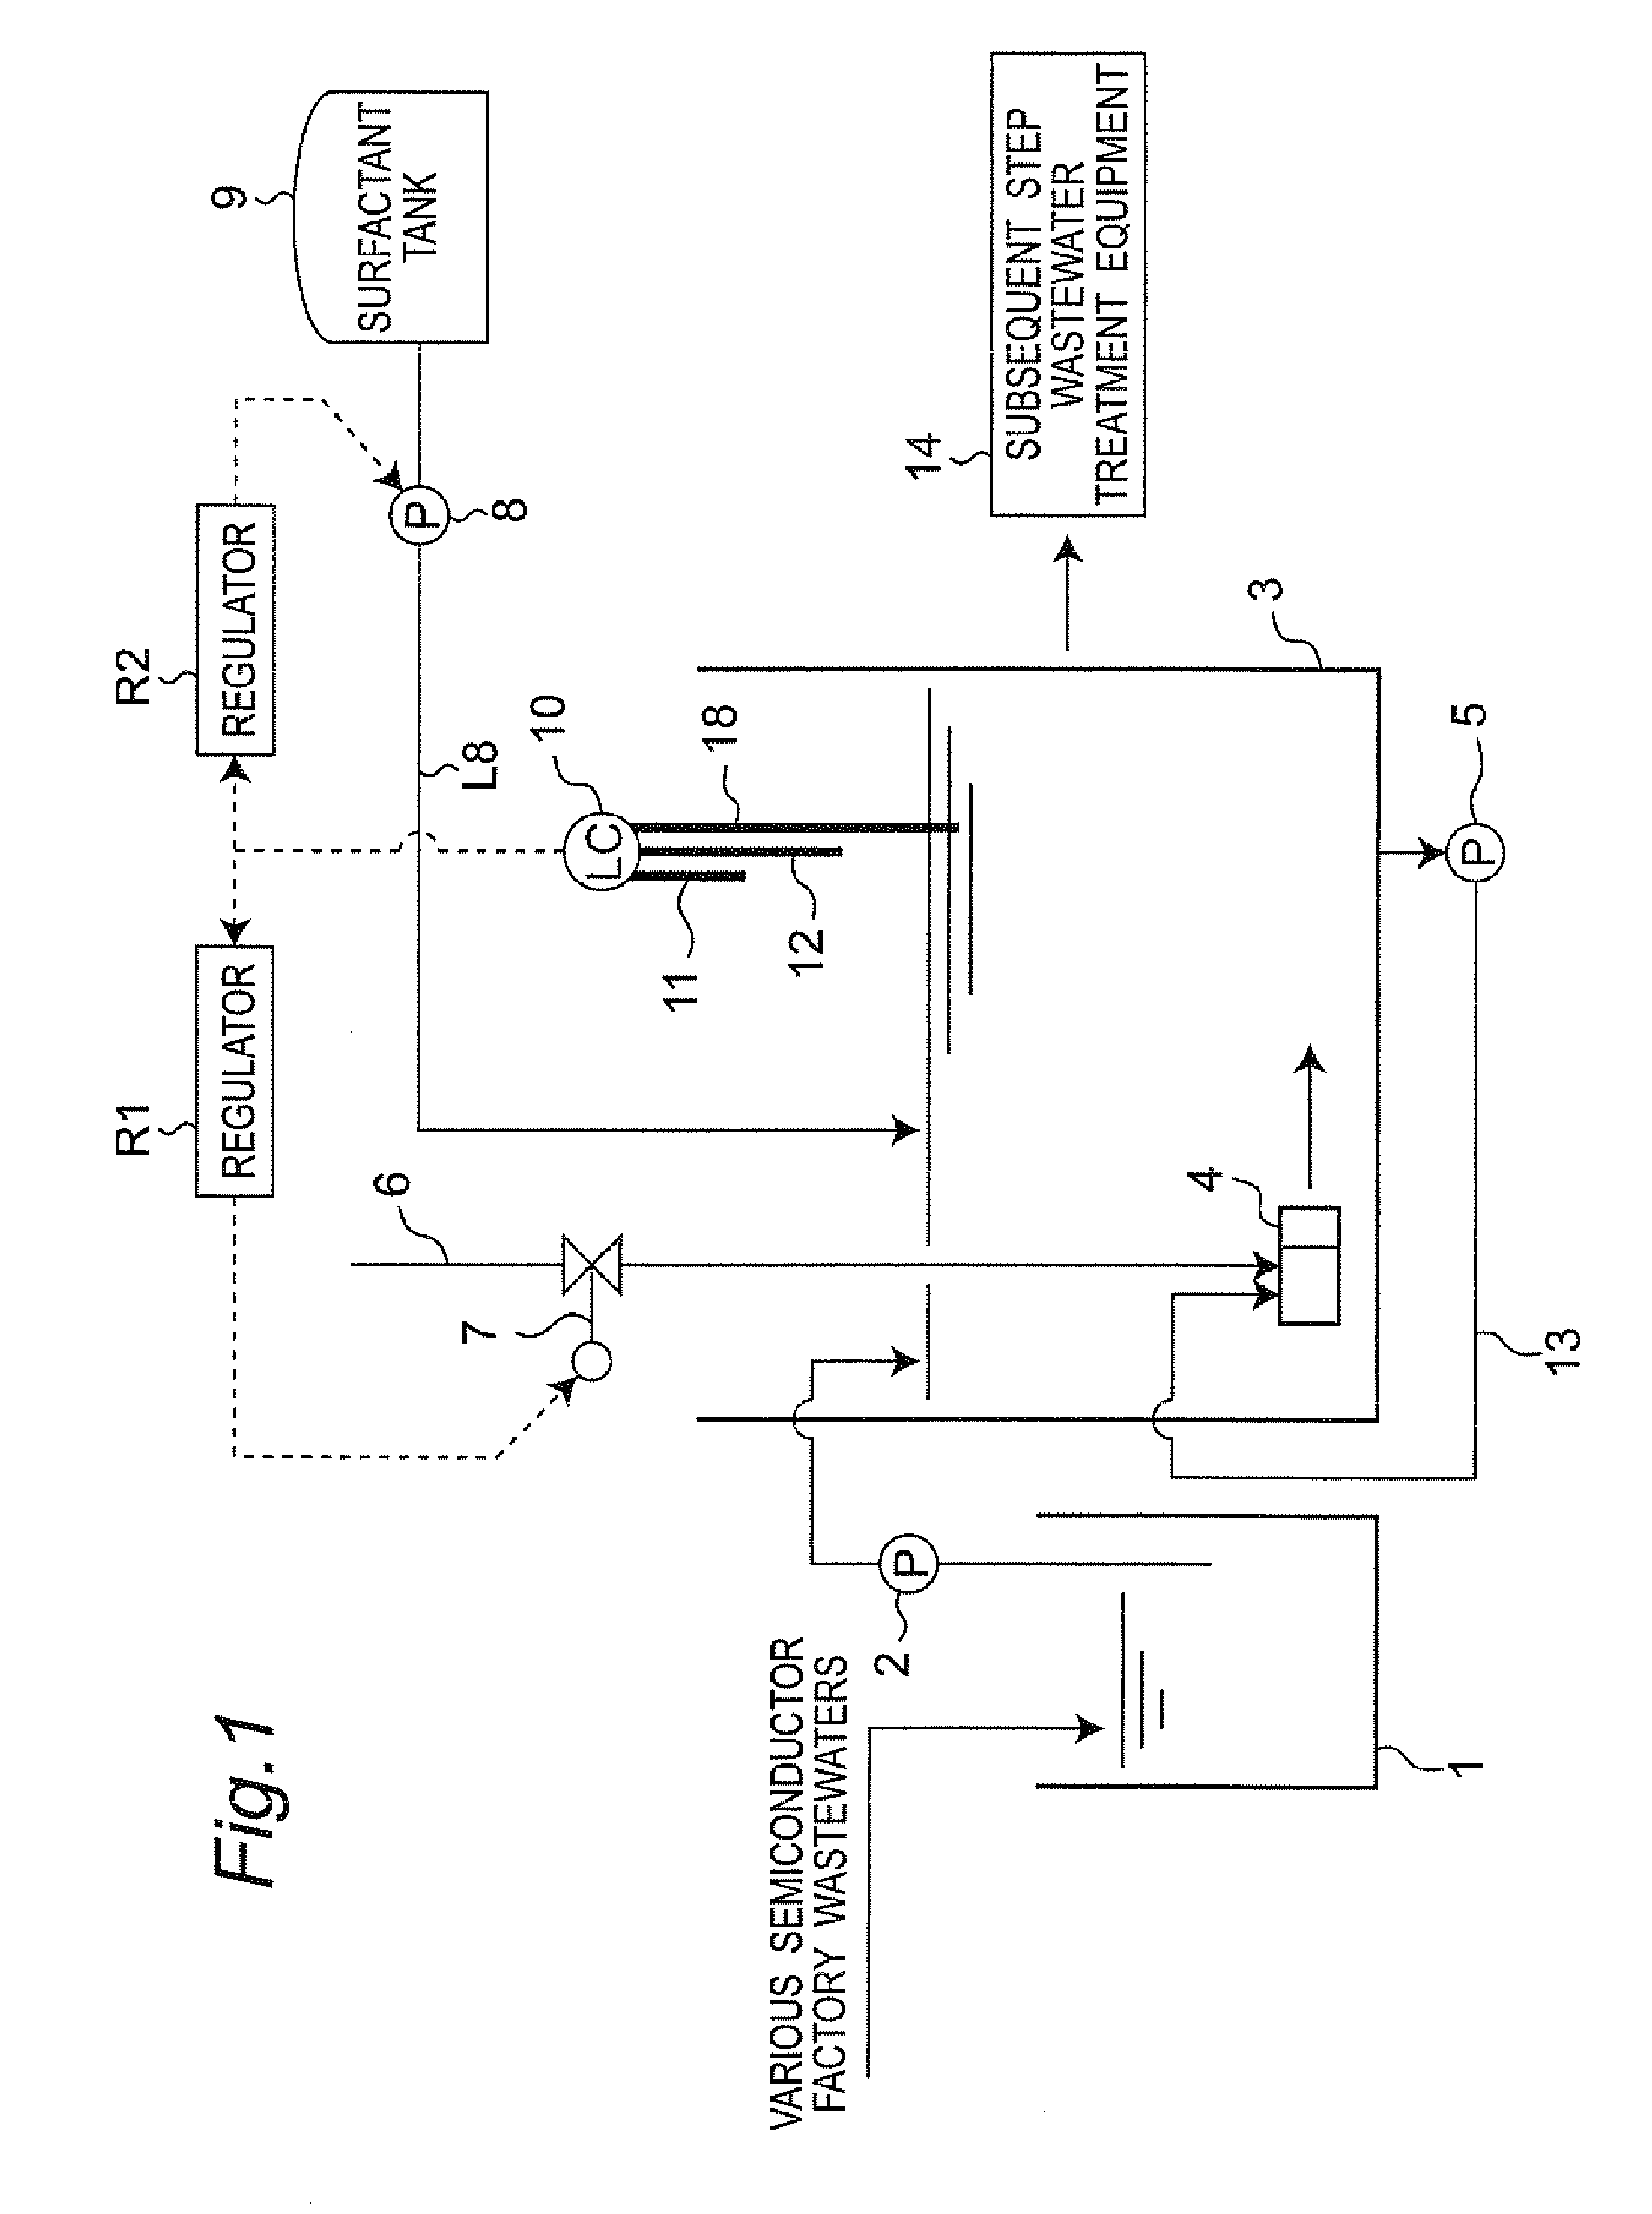 Wastewater treatment equipment and method of wastewater treatment